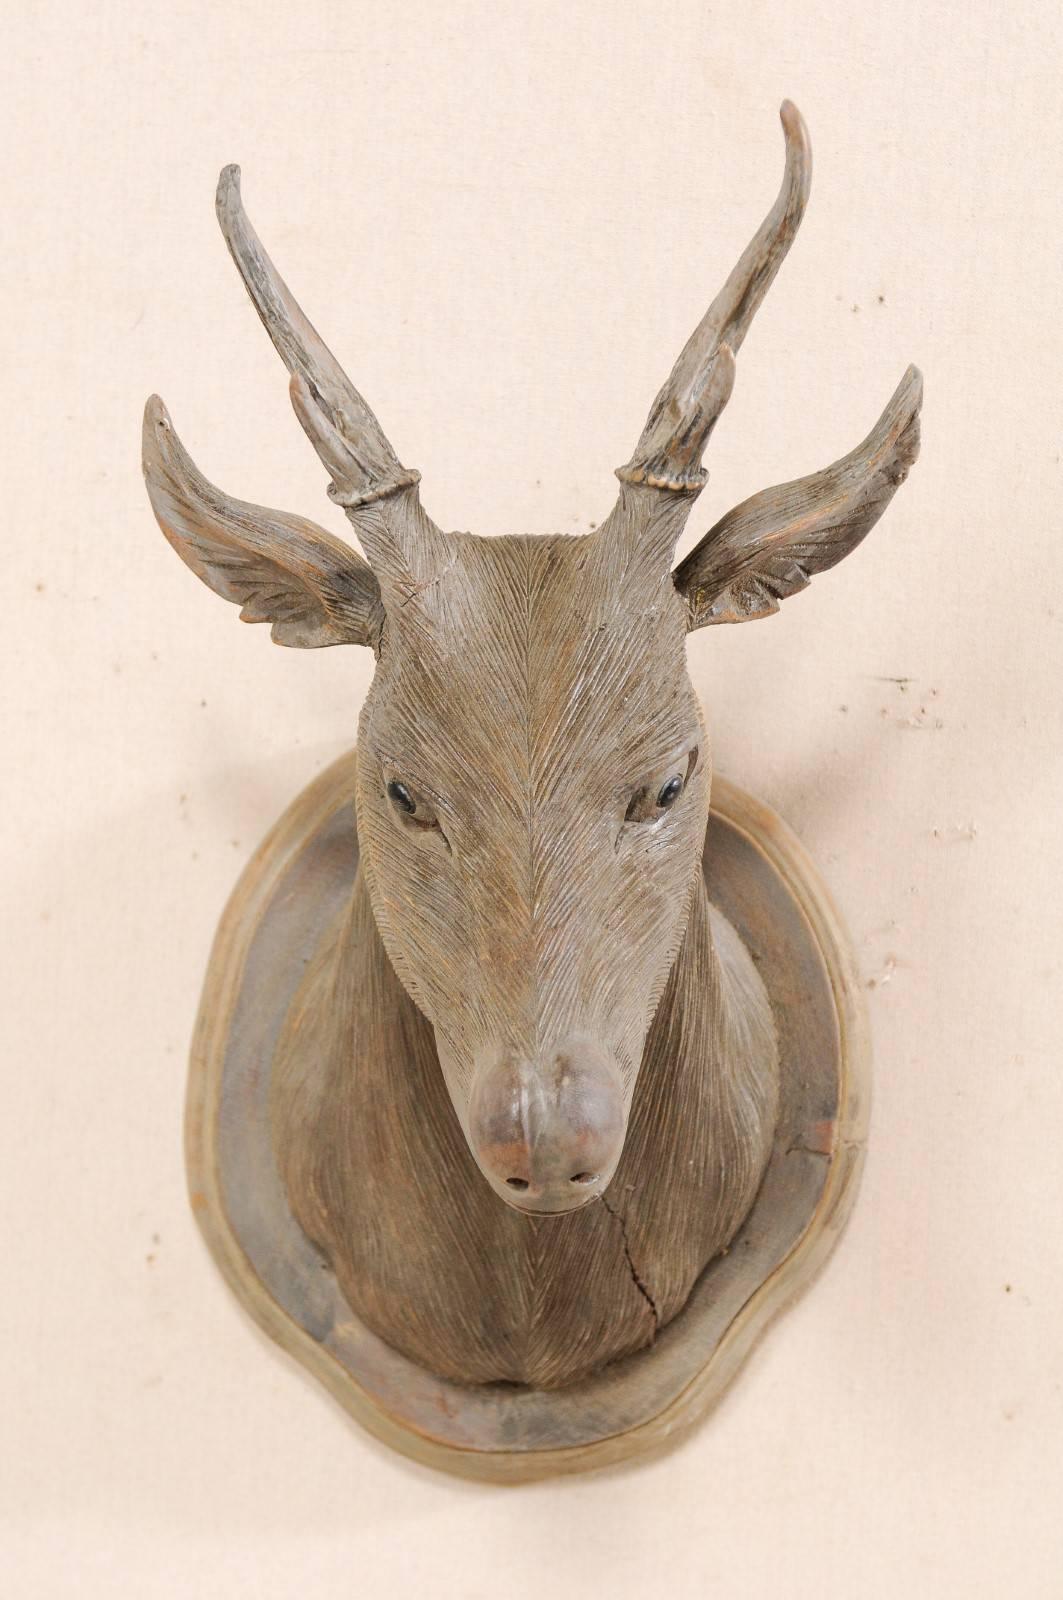 This buck head wood carved wall plaque is an excellent specimen of this master carver's artful work. This vintage hand-carved deer head has expressive features, eyes looking down as if studying something at foot. Meticulous lines make up the fine